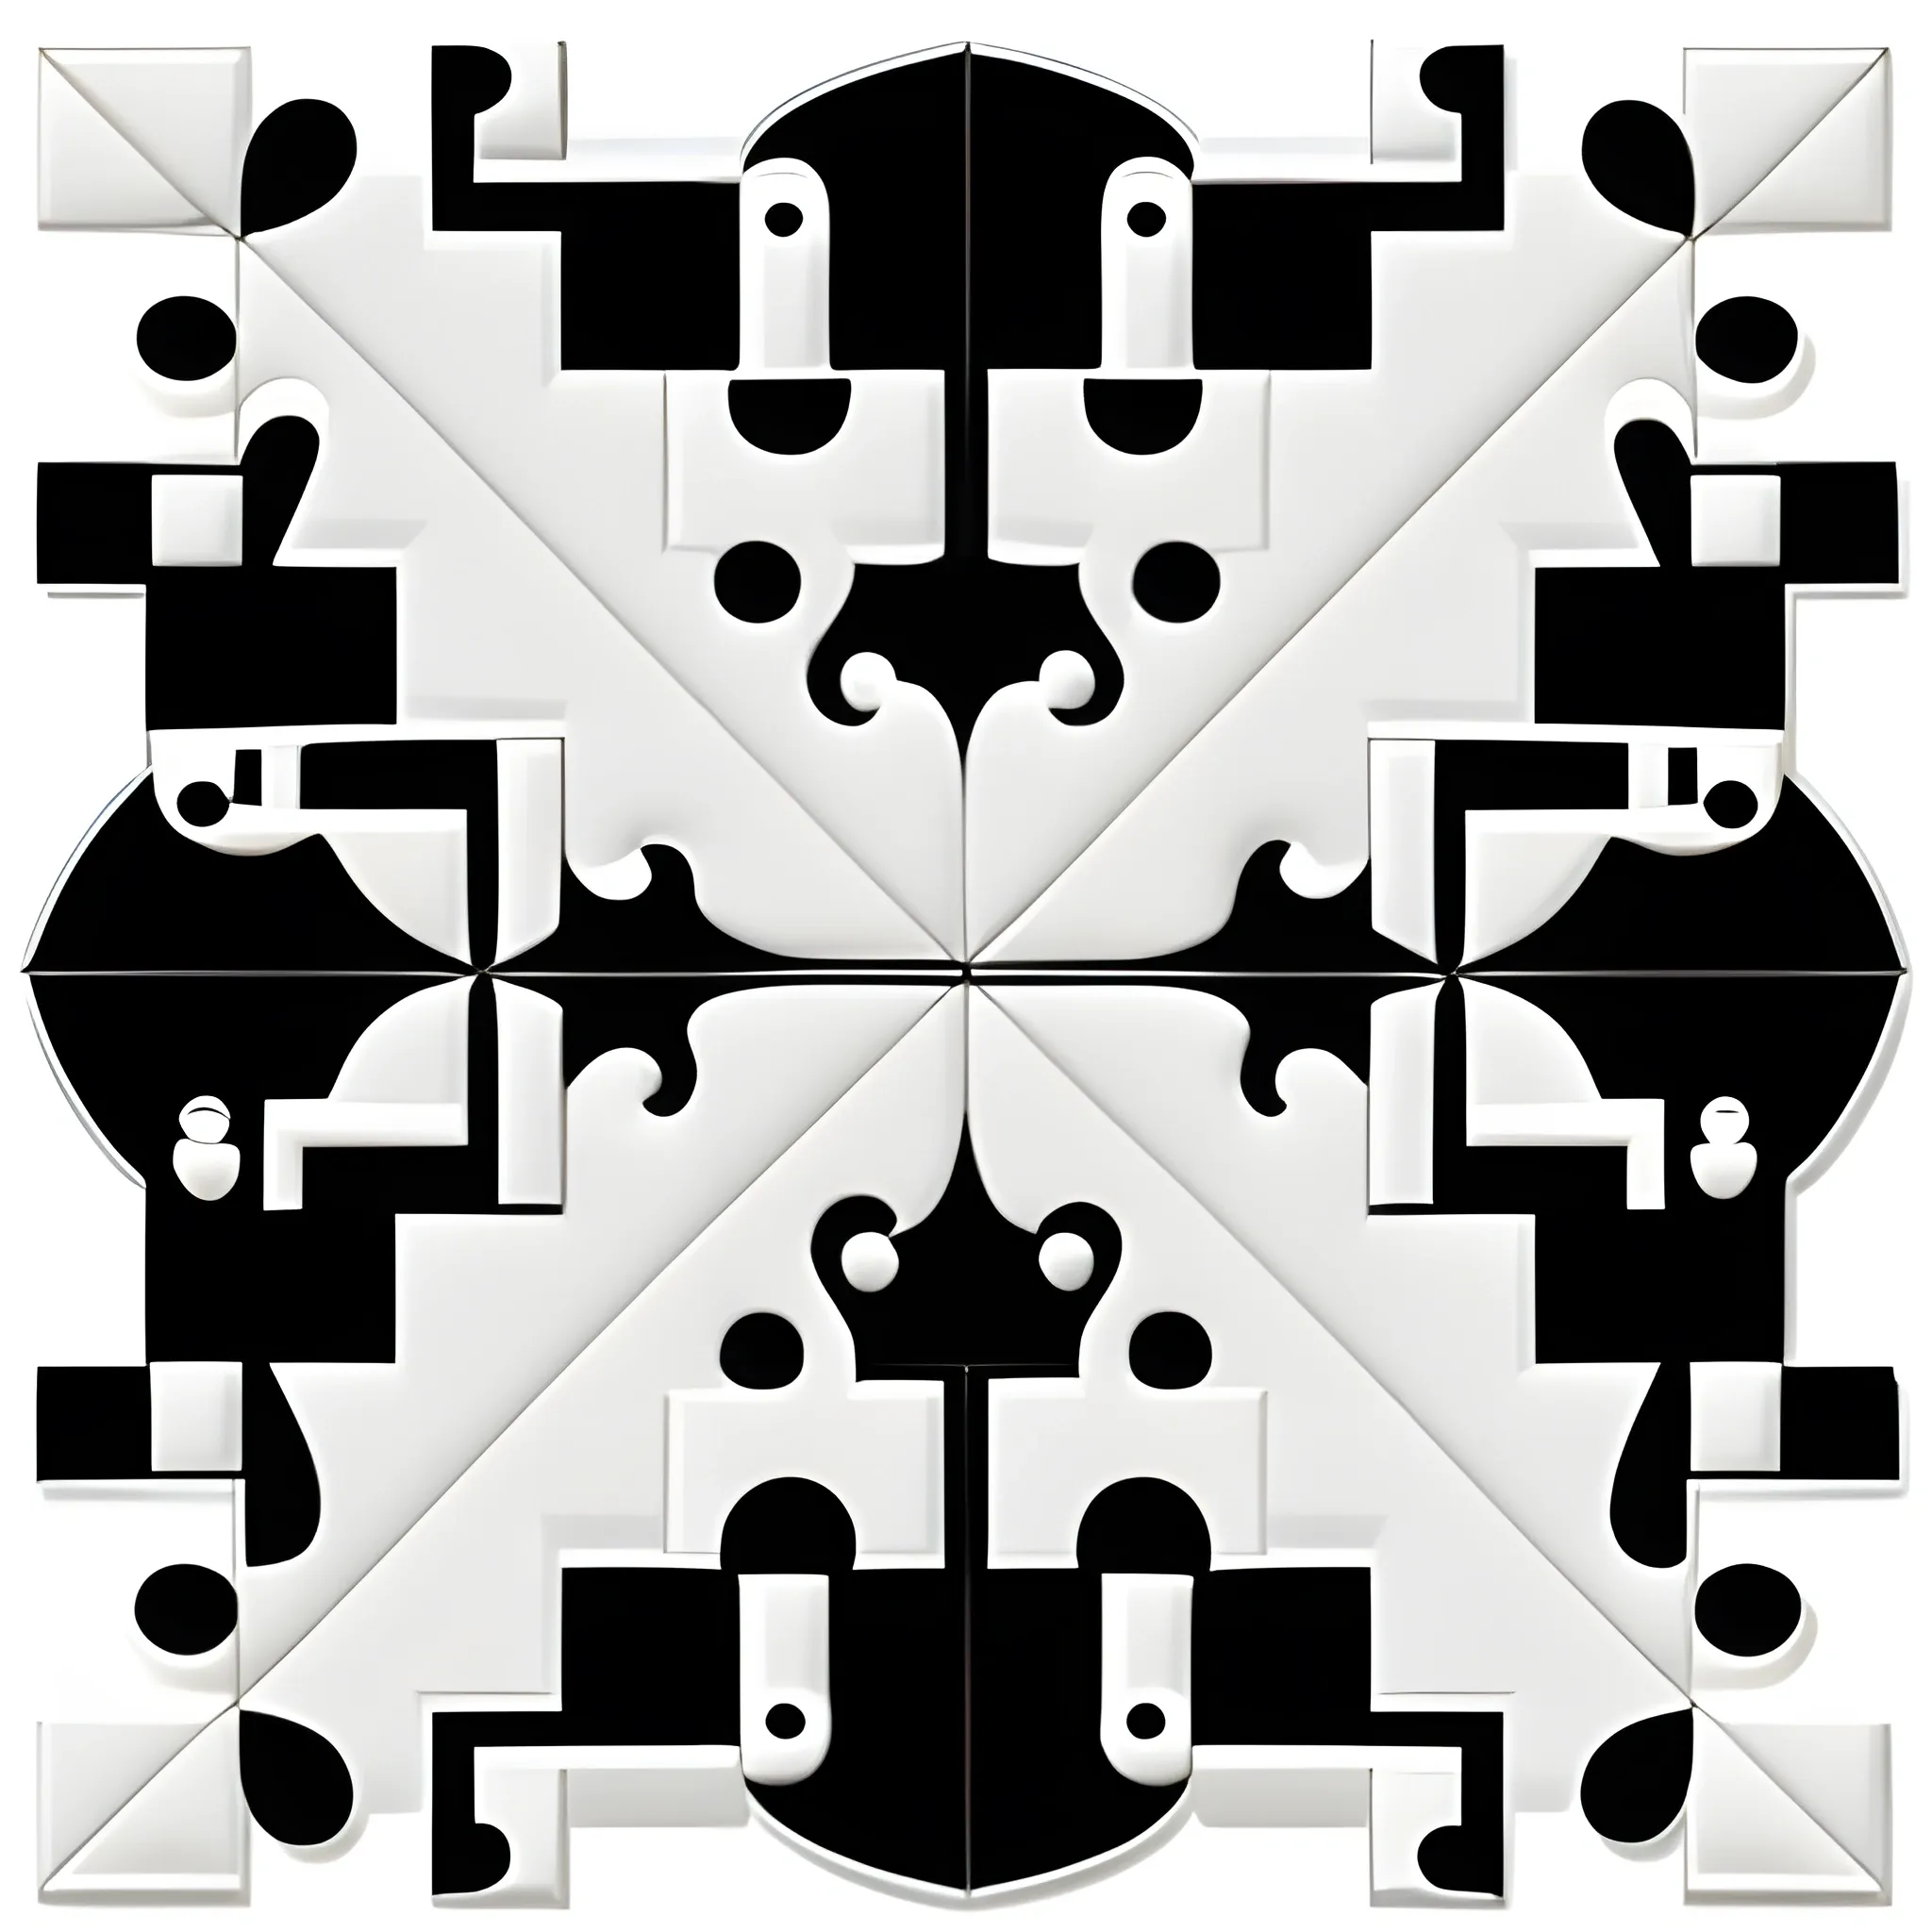 puzzle pattern with 20 differente pieces, white pieces, black border, pieces with straight edges, square resolution., Cartoon., 3D